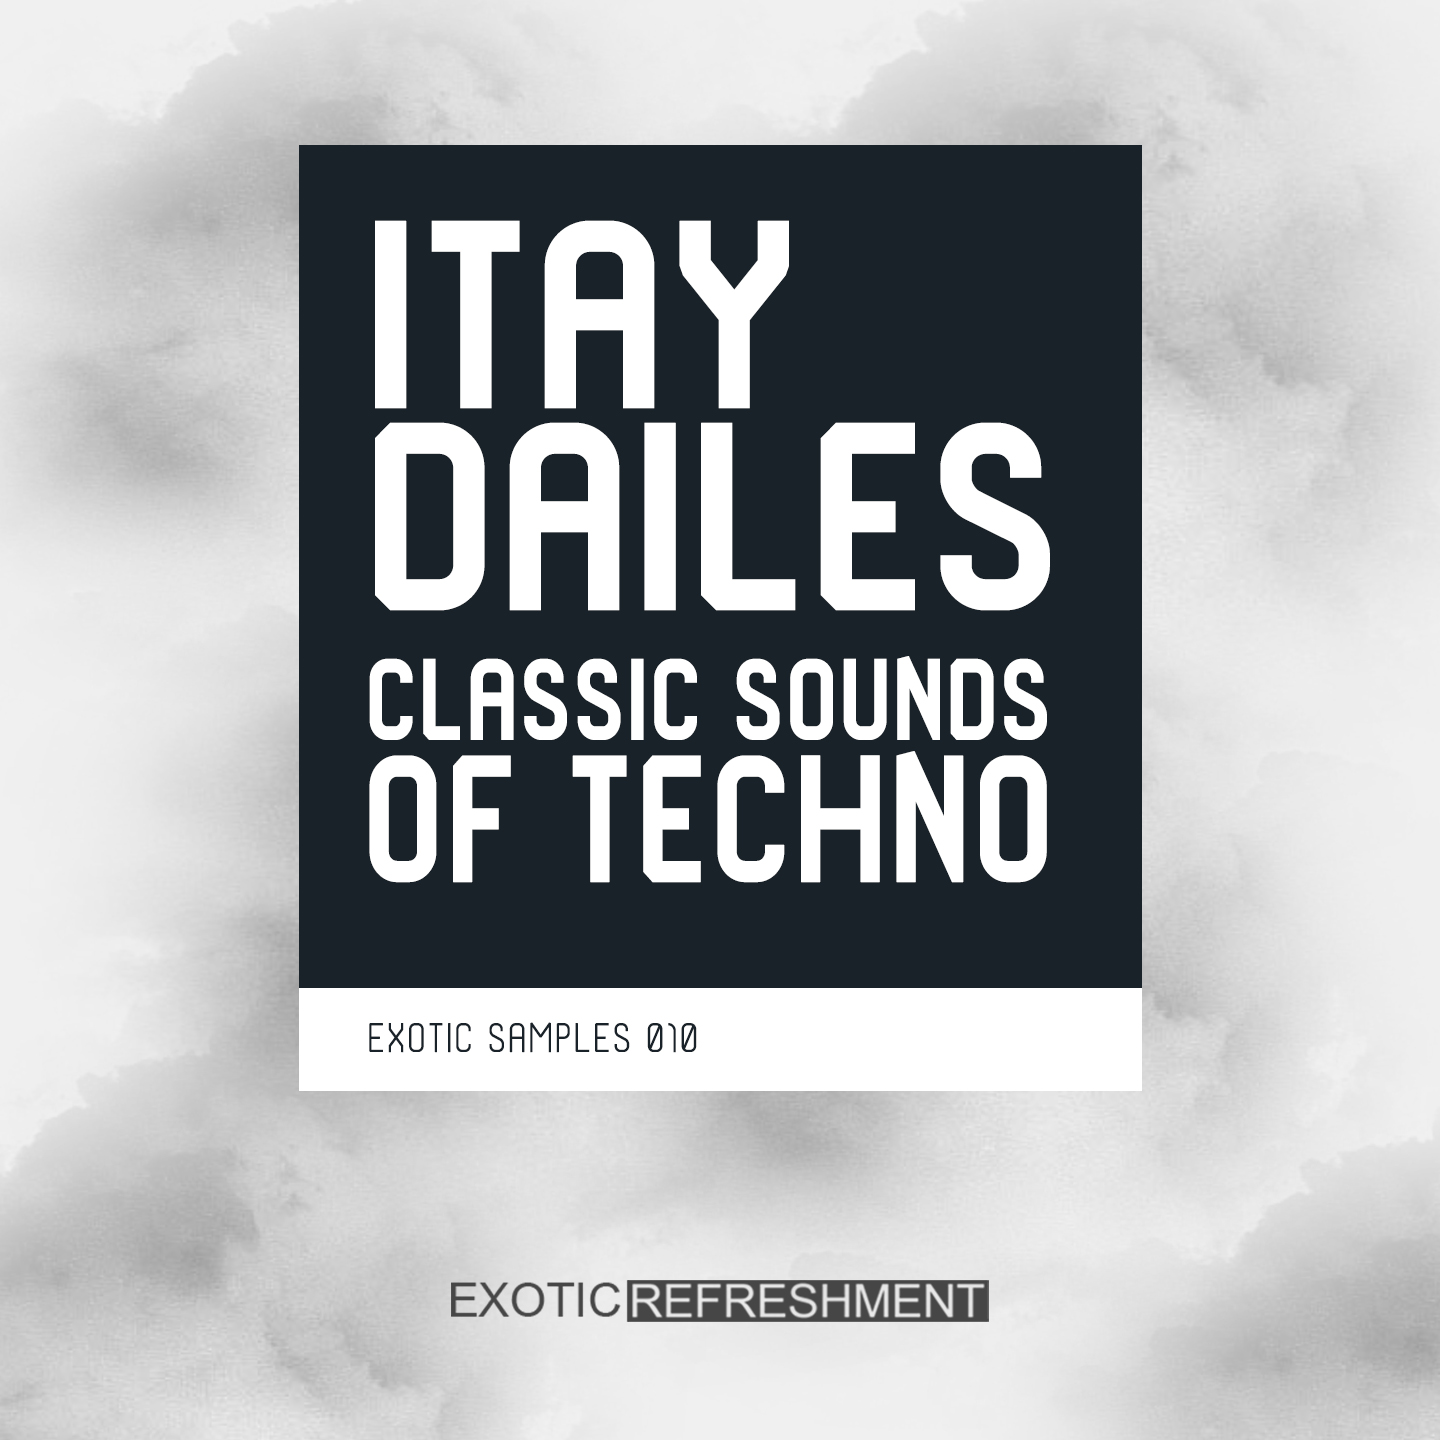 Itay Dailes Classic Sounds of Techno